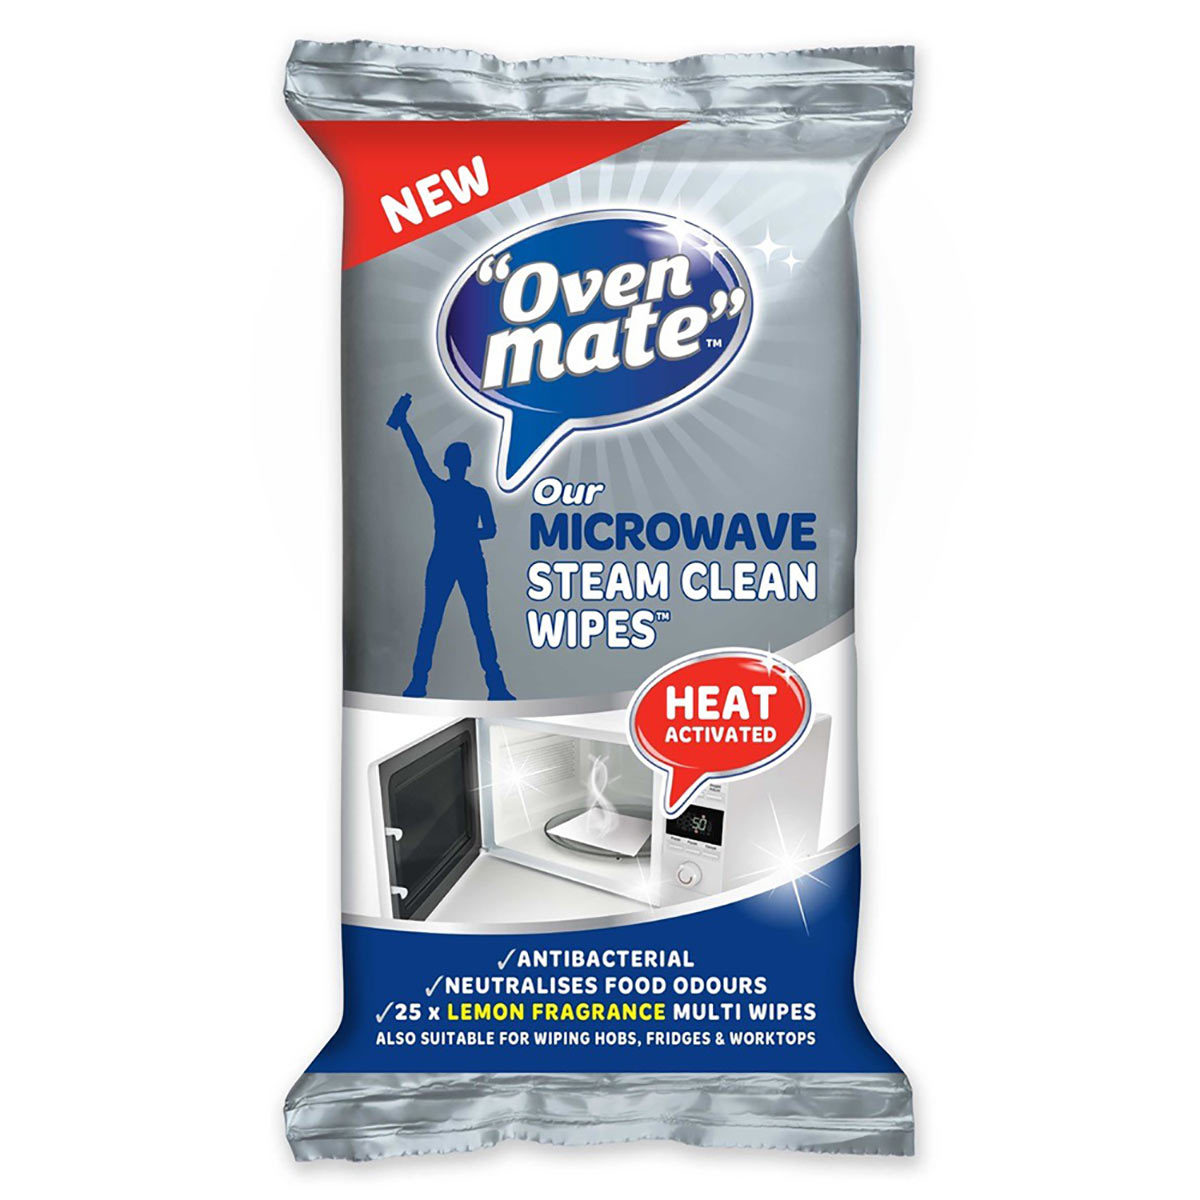 Oven Mate Microwave Steam Clean Wipes, 6 Pack